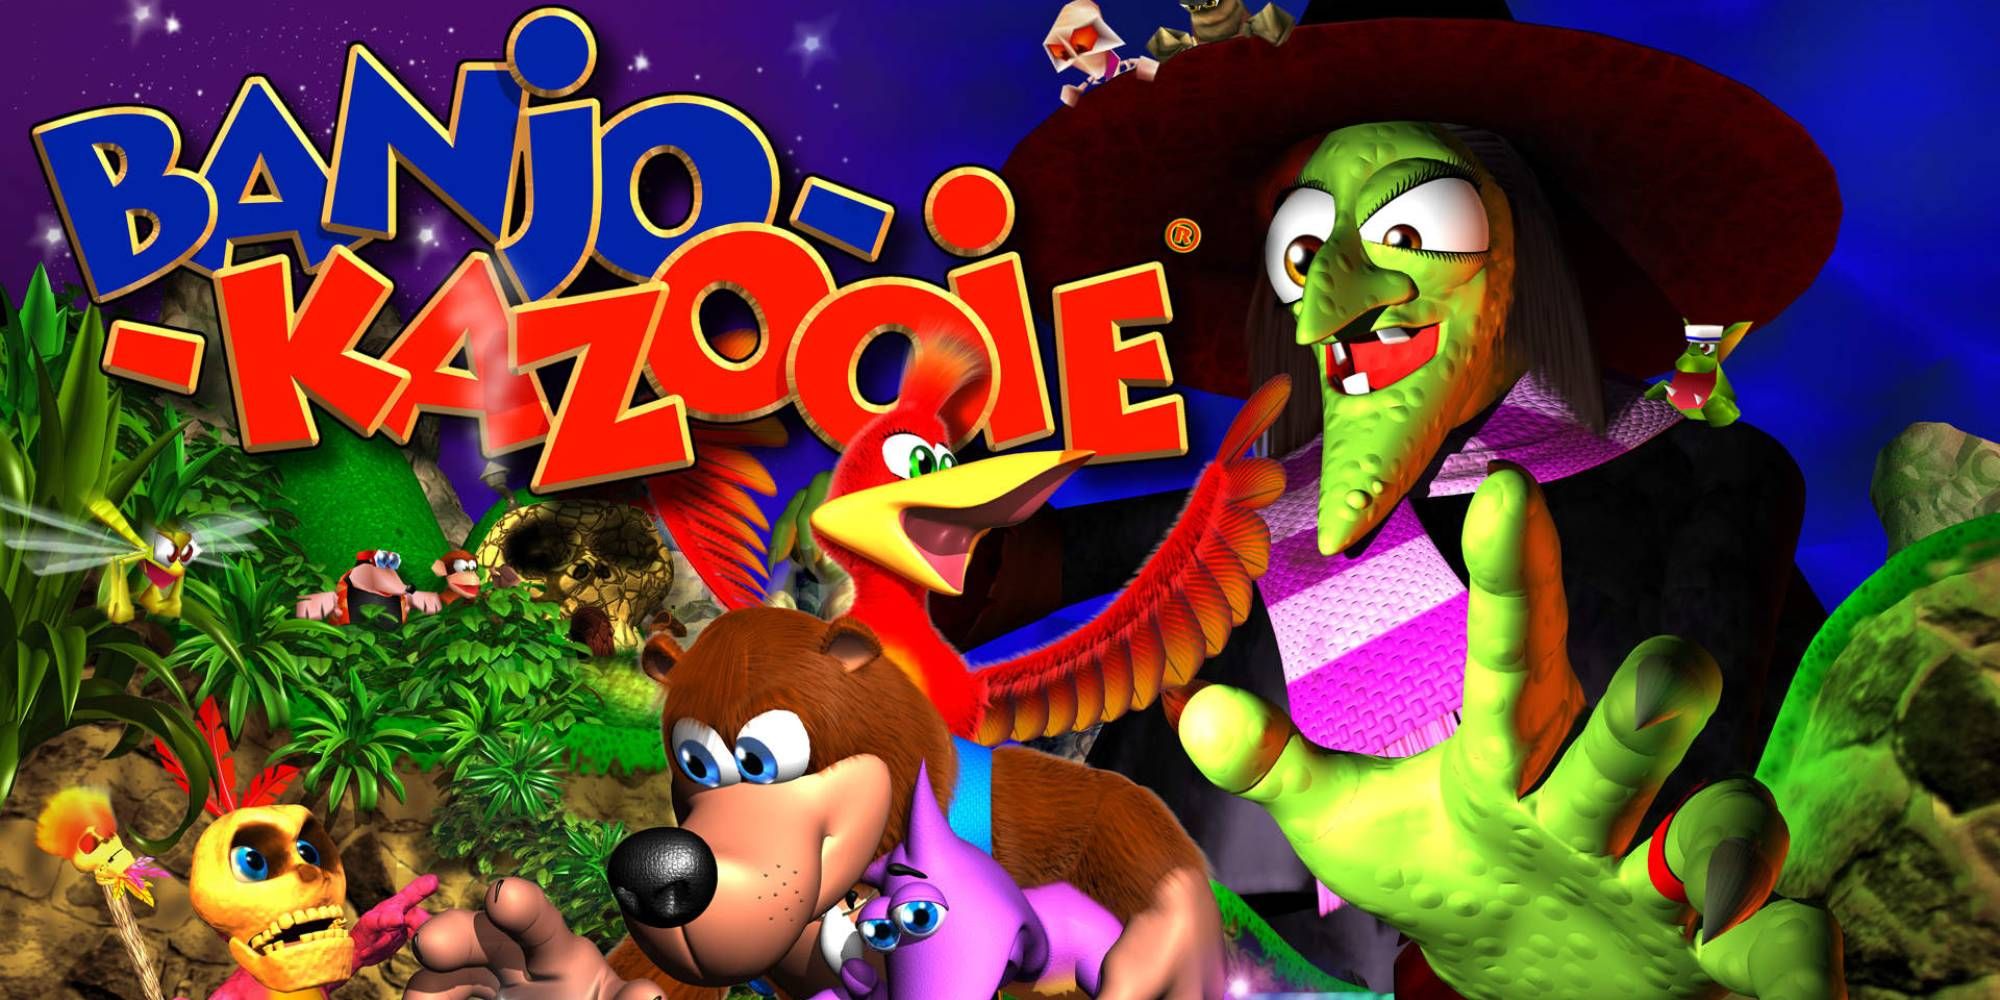 A bear with a red bird escapes a large green witch doll in the colorful environment of Banjo-Kazooie